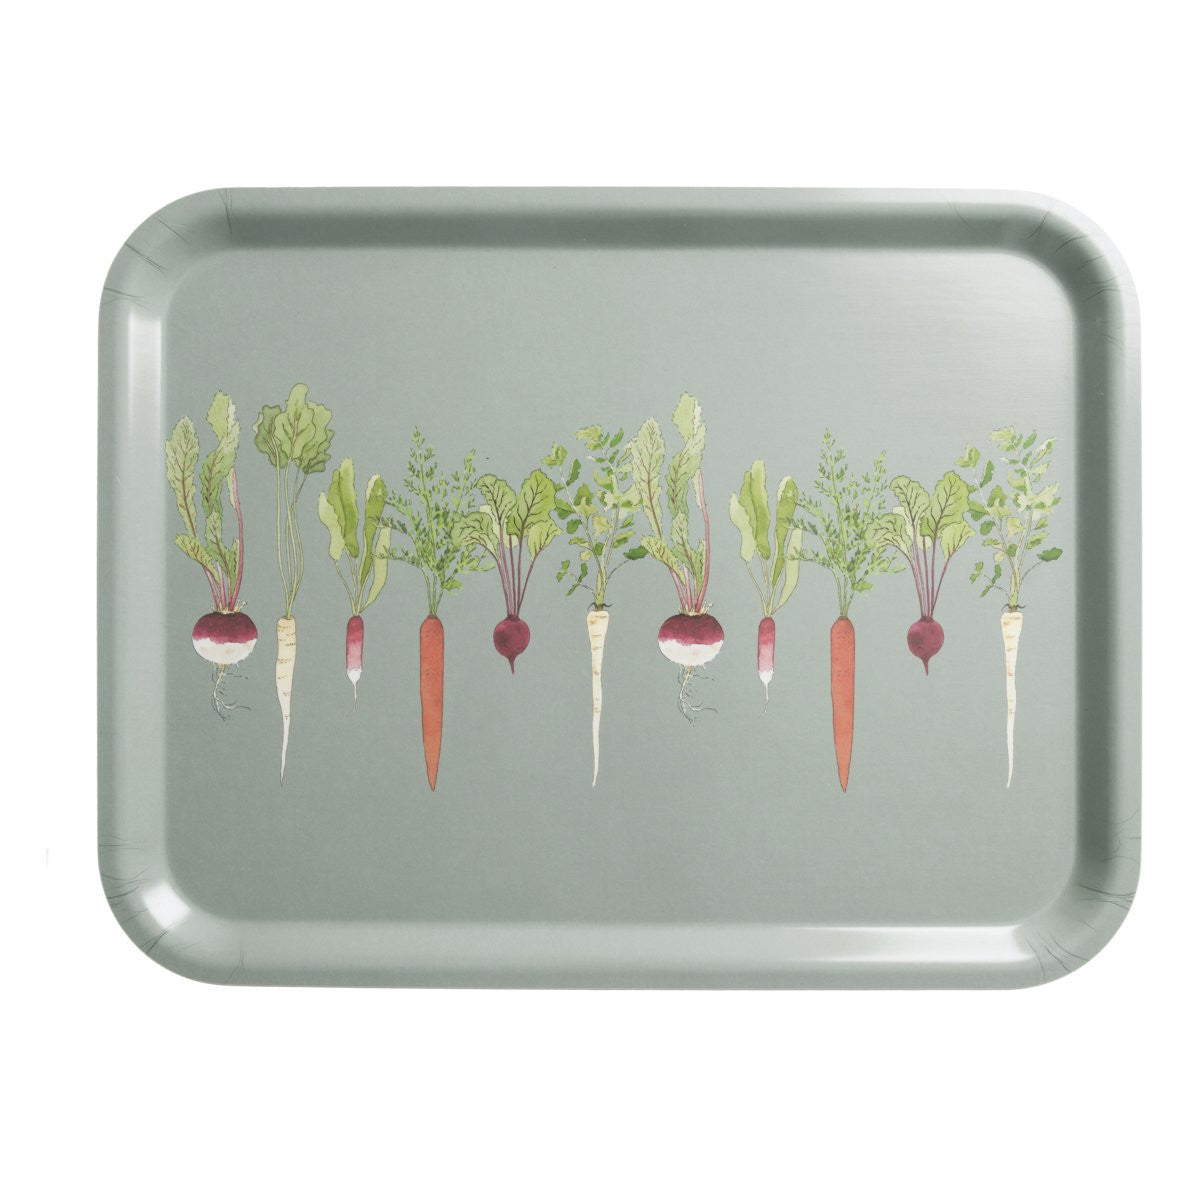 Home Grown large birch tray from Sophie Allport.